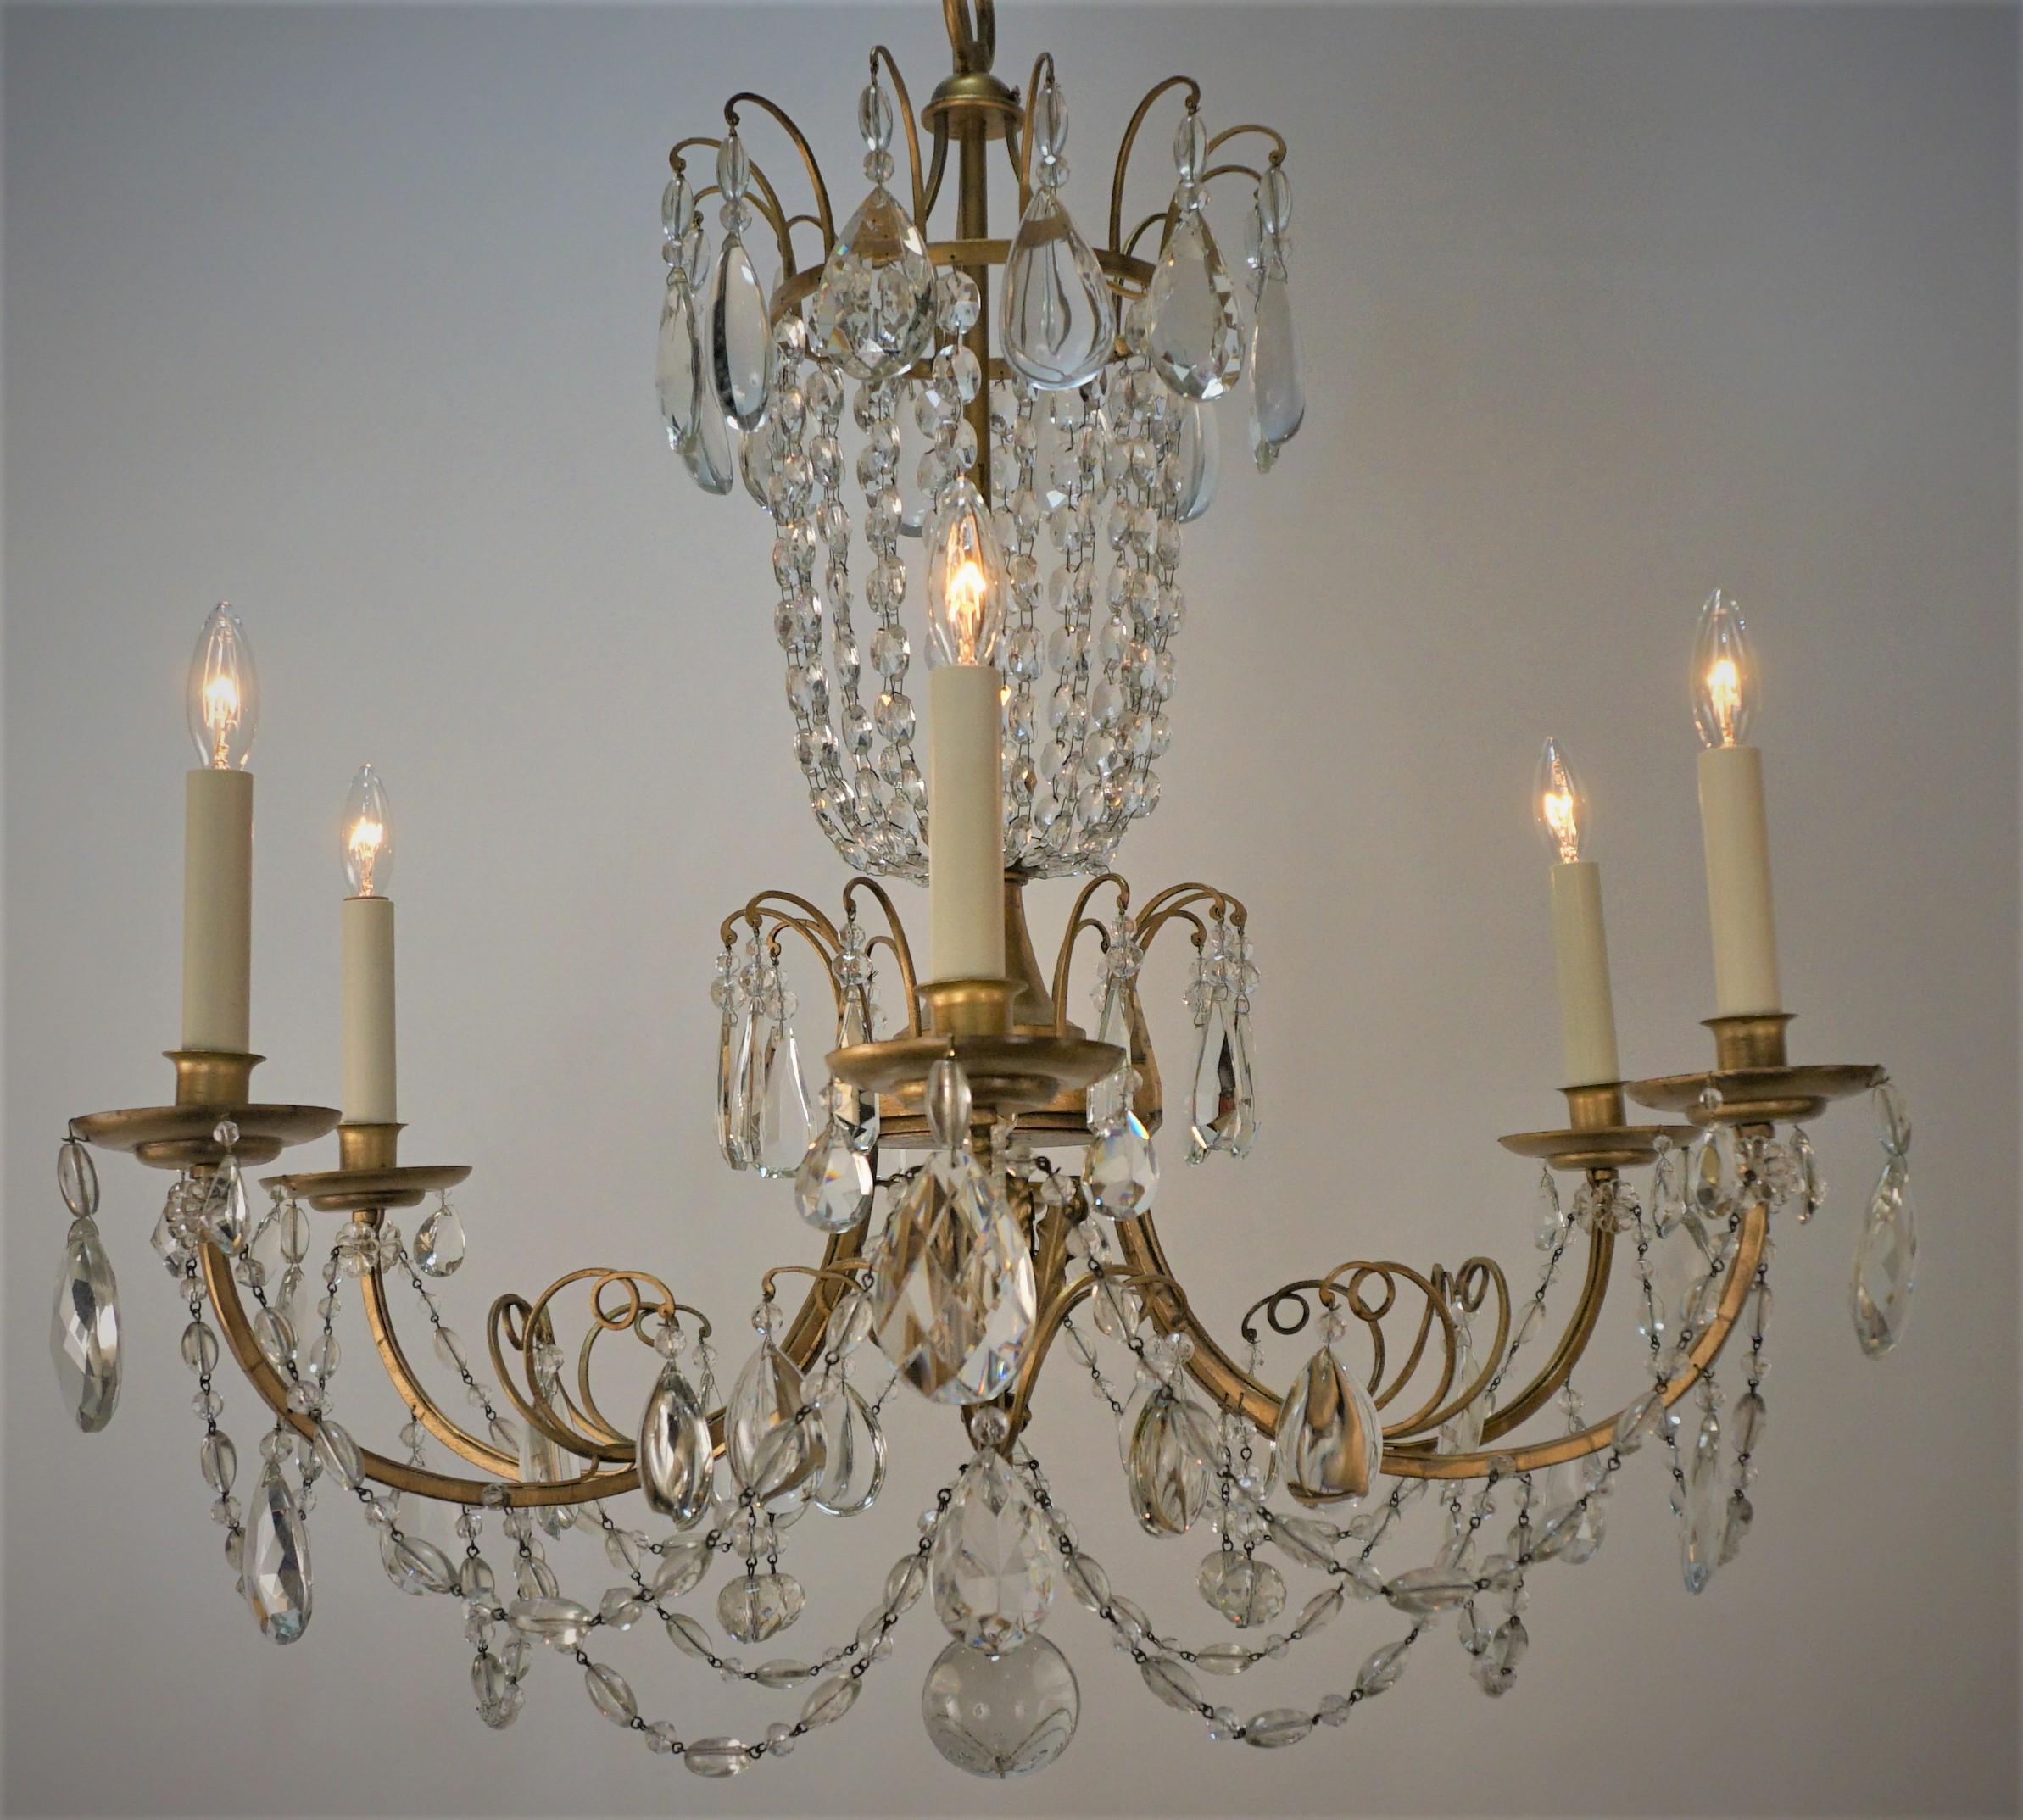 1930's Gilt Iron Crystal Chandelier In Good Condition For Sale In Fairfax, VA